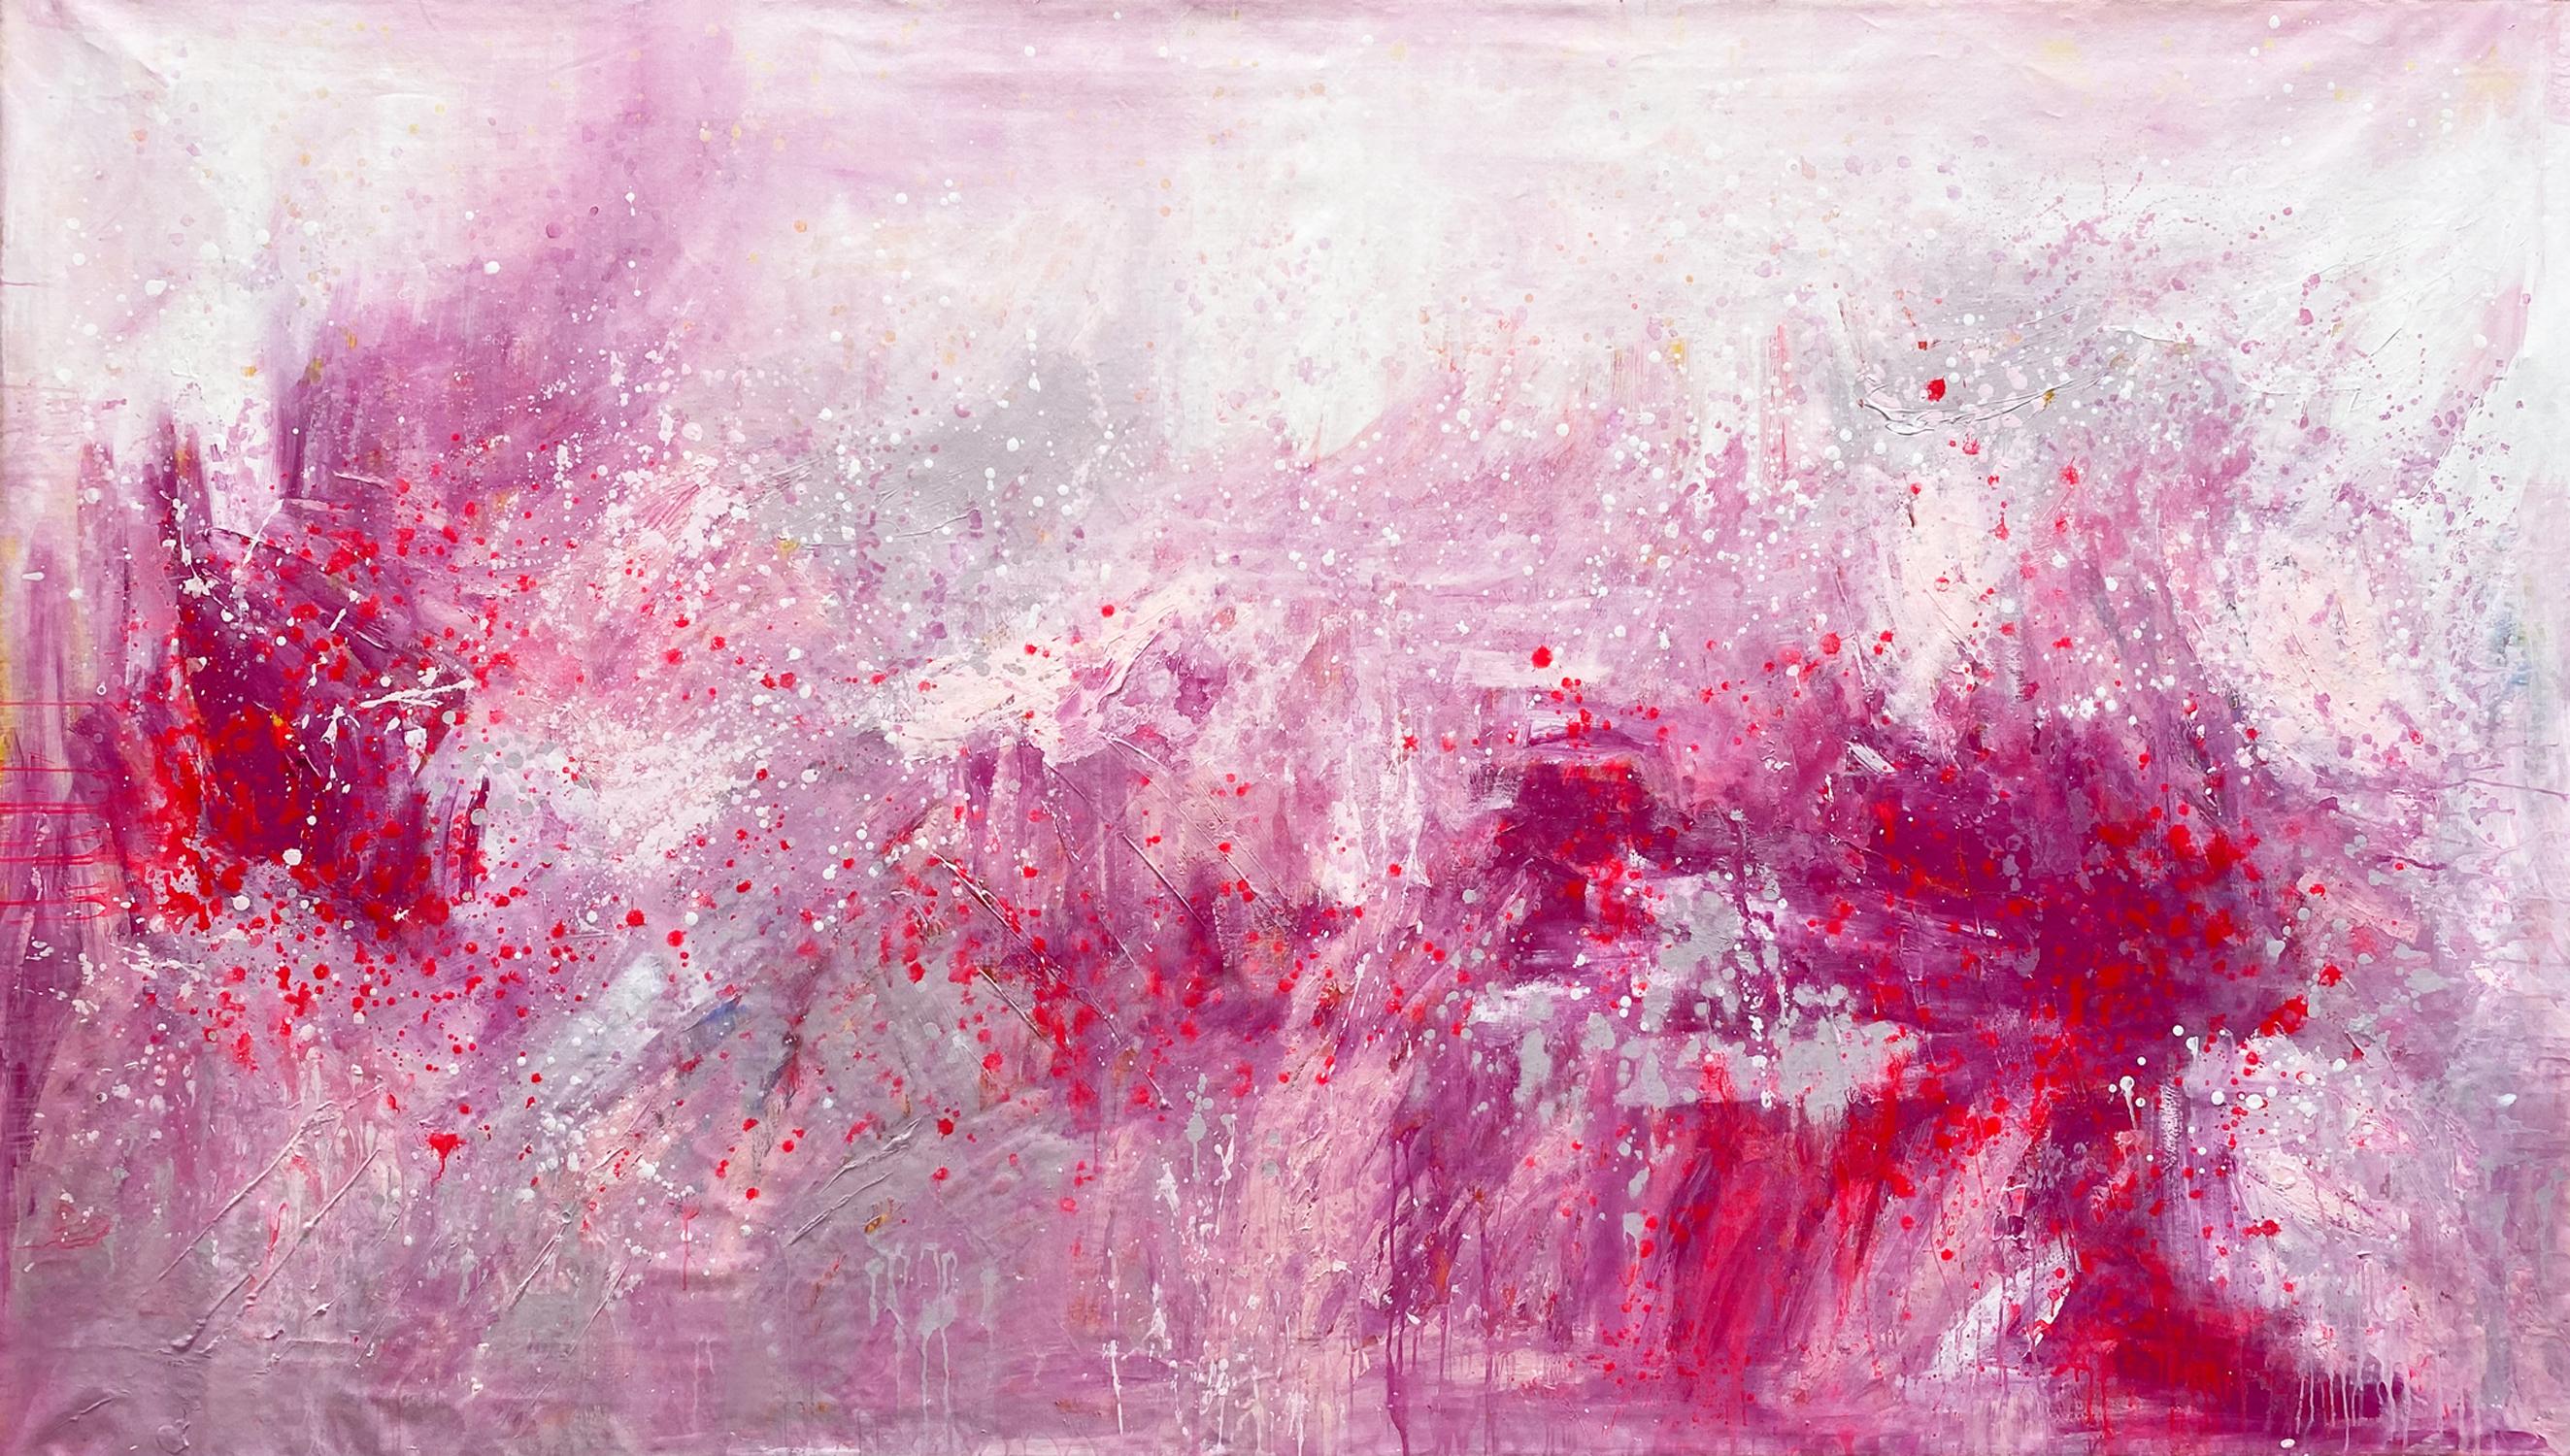 Kathleen Rhee Abstract Painting - Peace Garden  large statement piece abstract expression painting pink red white